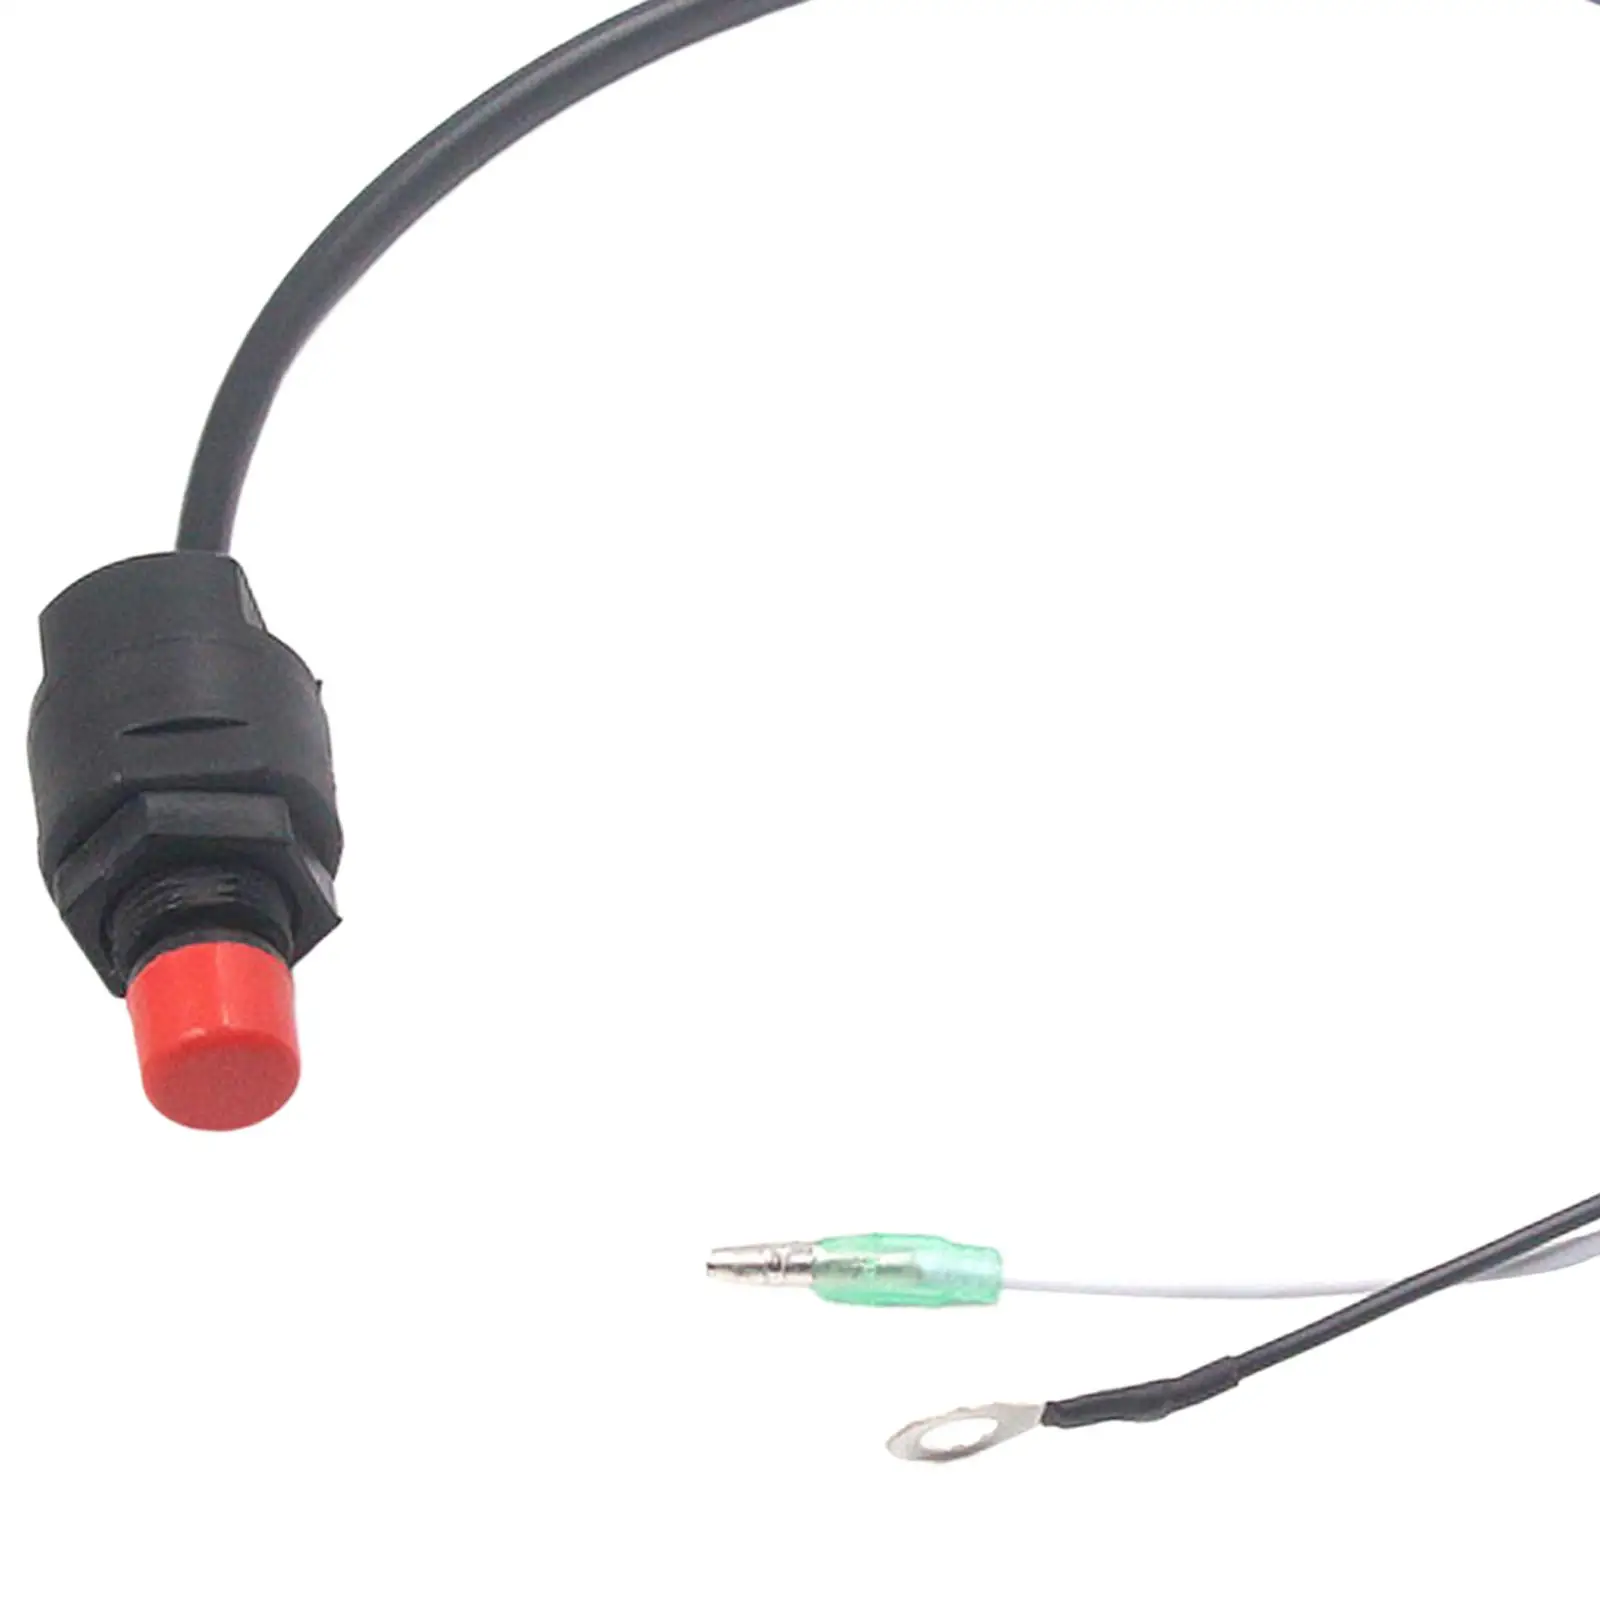 Boat Kill Switch Replaces Engine Motor Emergency Kill Stop Switch for